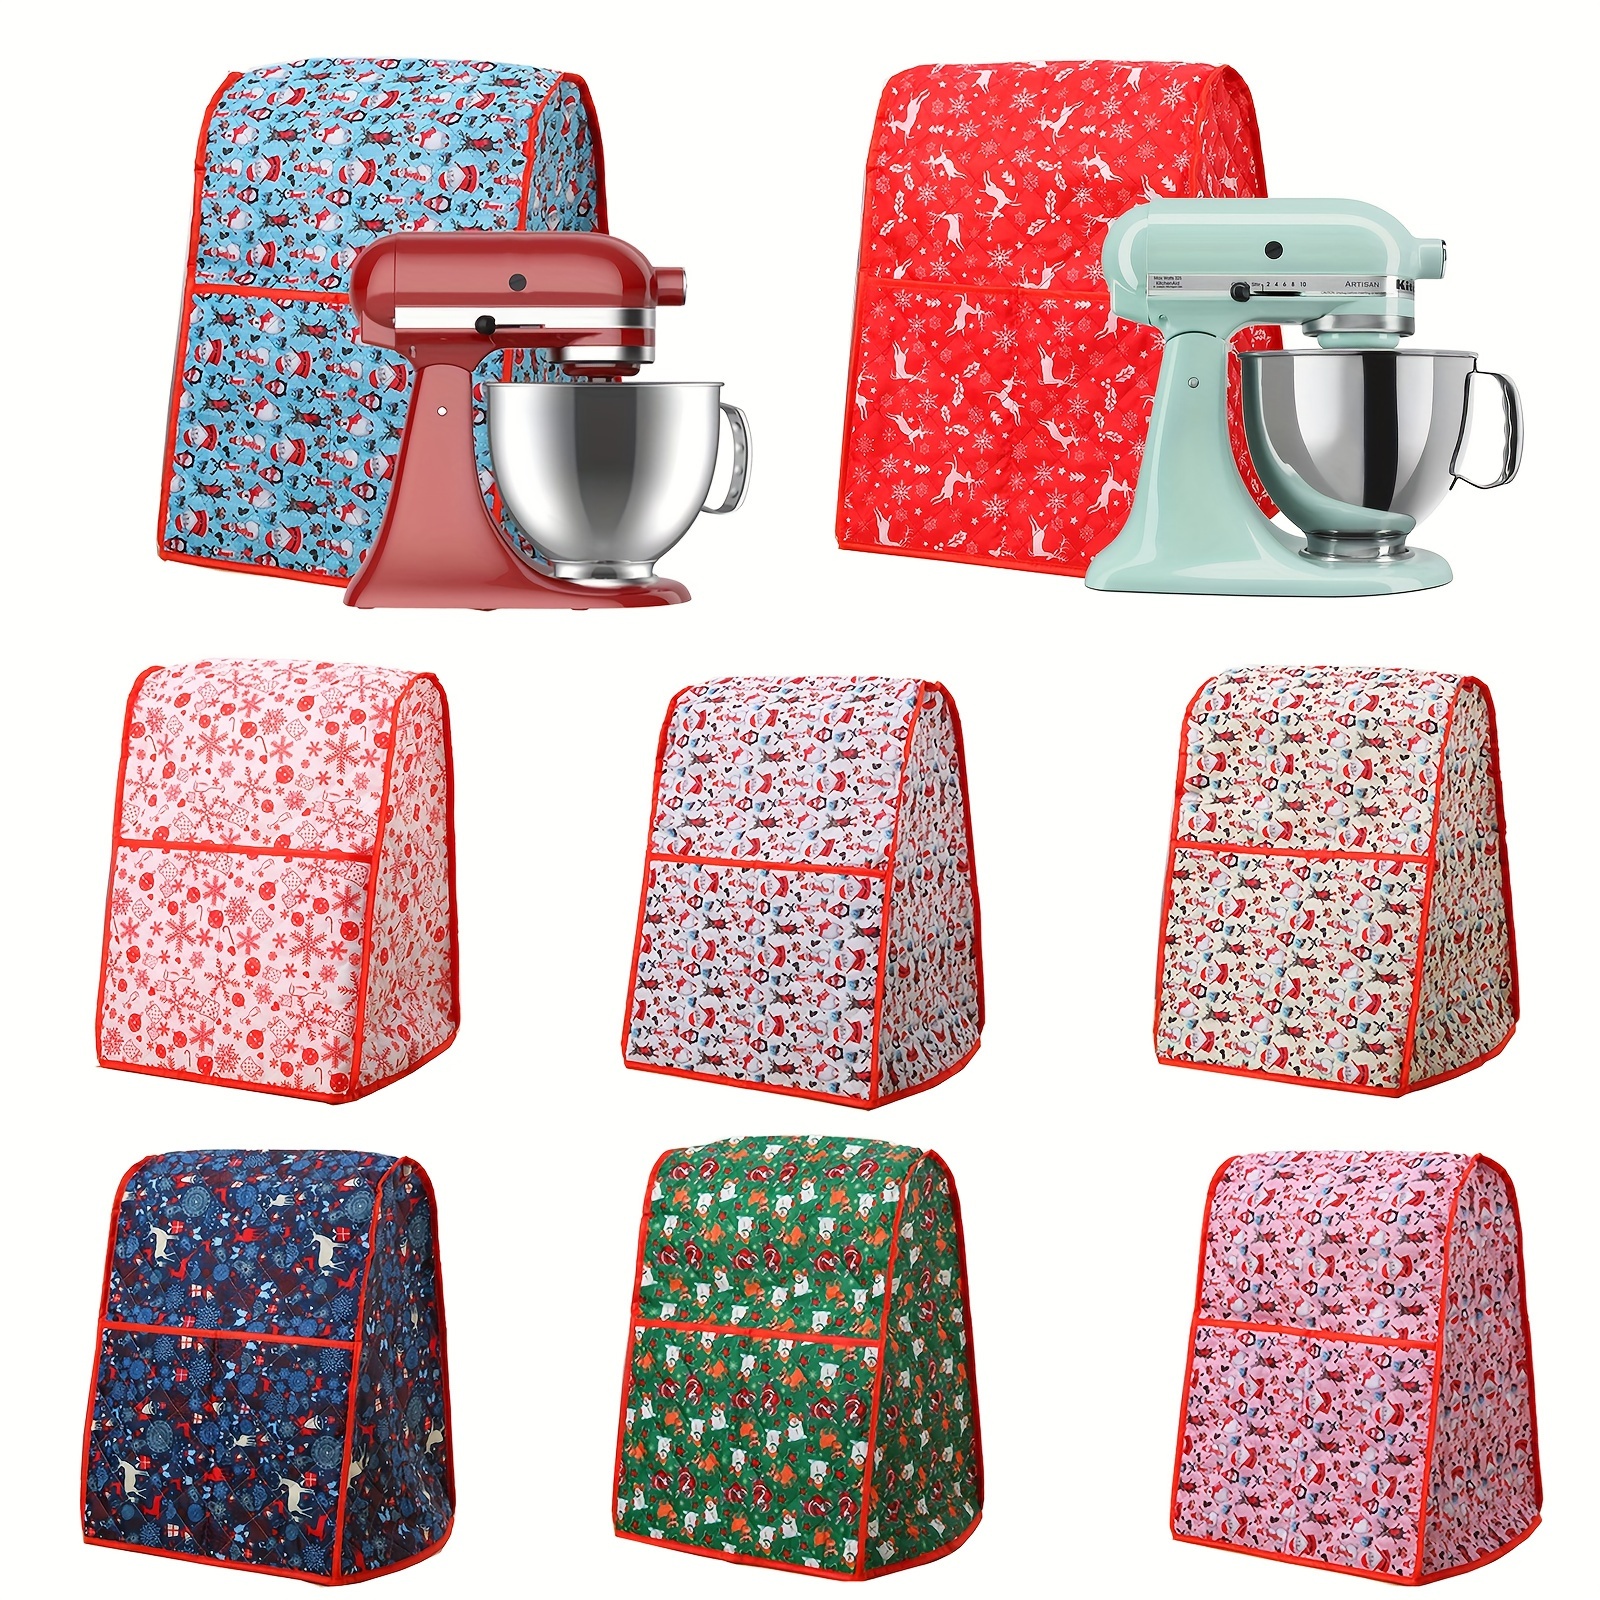 Kitchen appliances with their new quilted dust covers  Appliance covers,  Crafts sewing patterns, Quilting tips